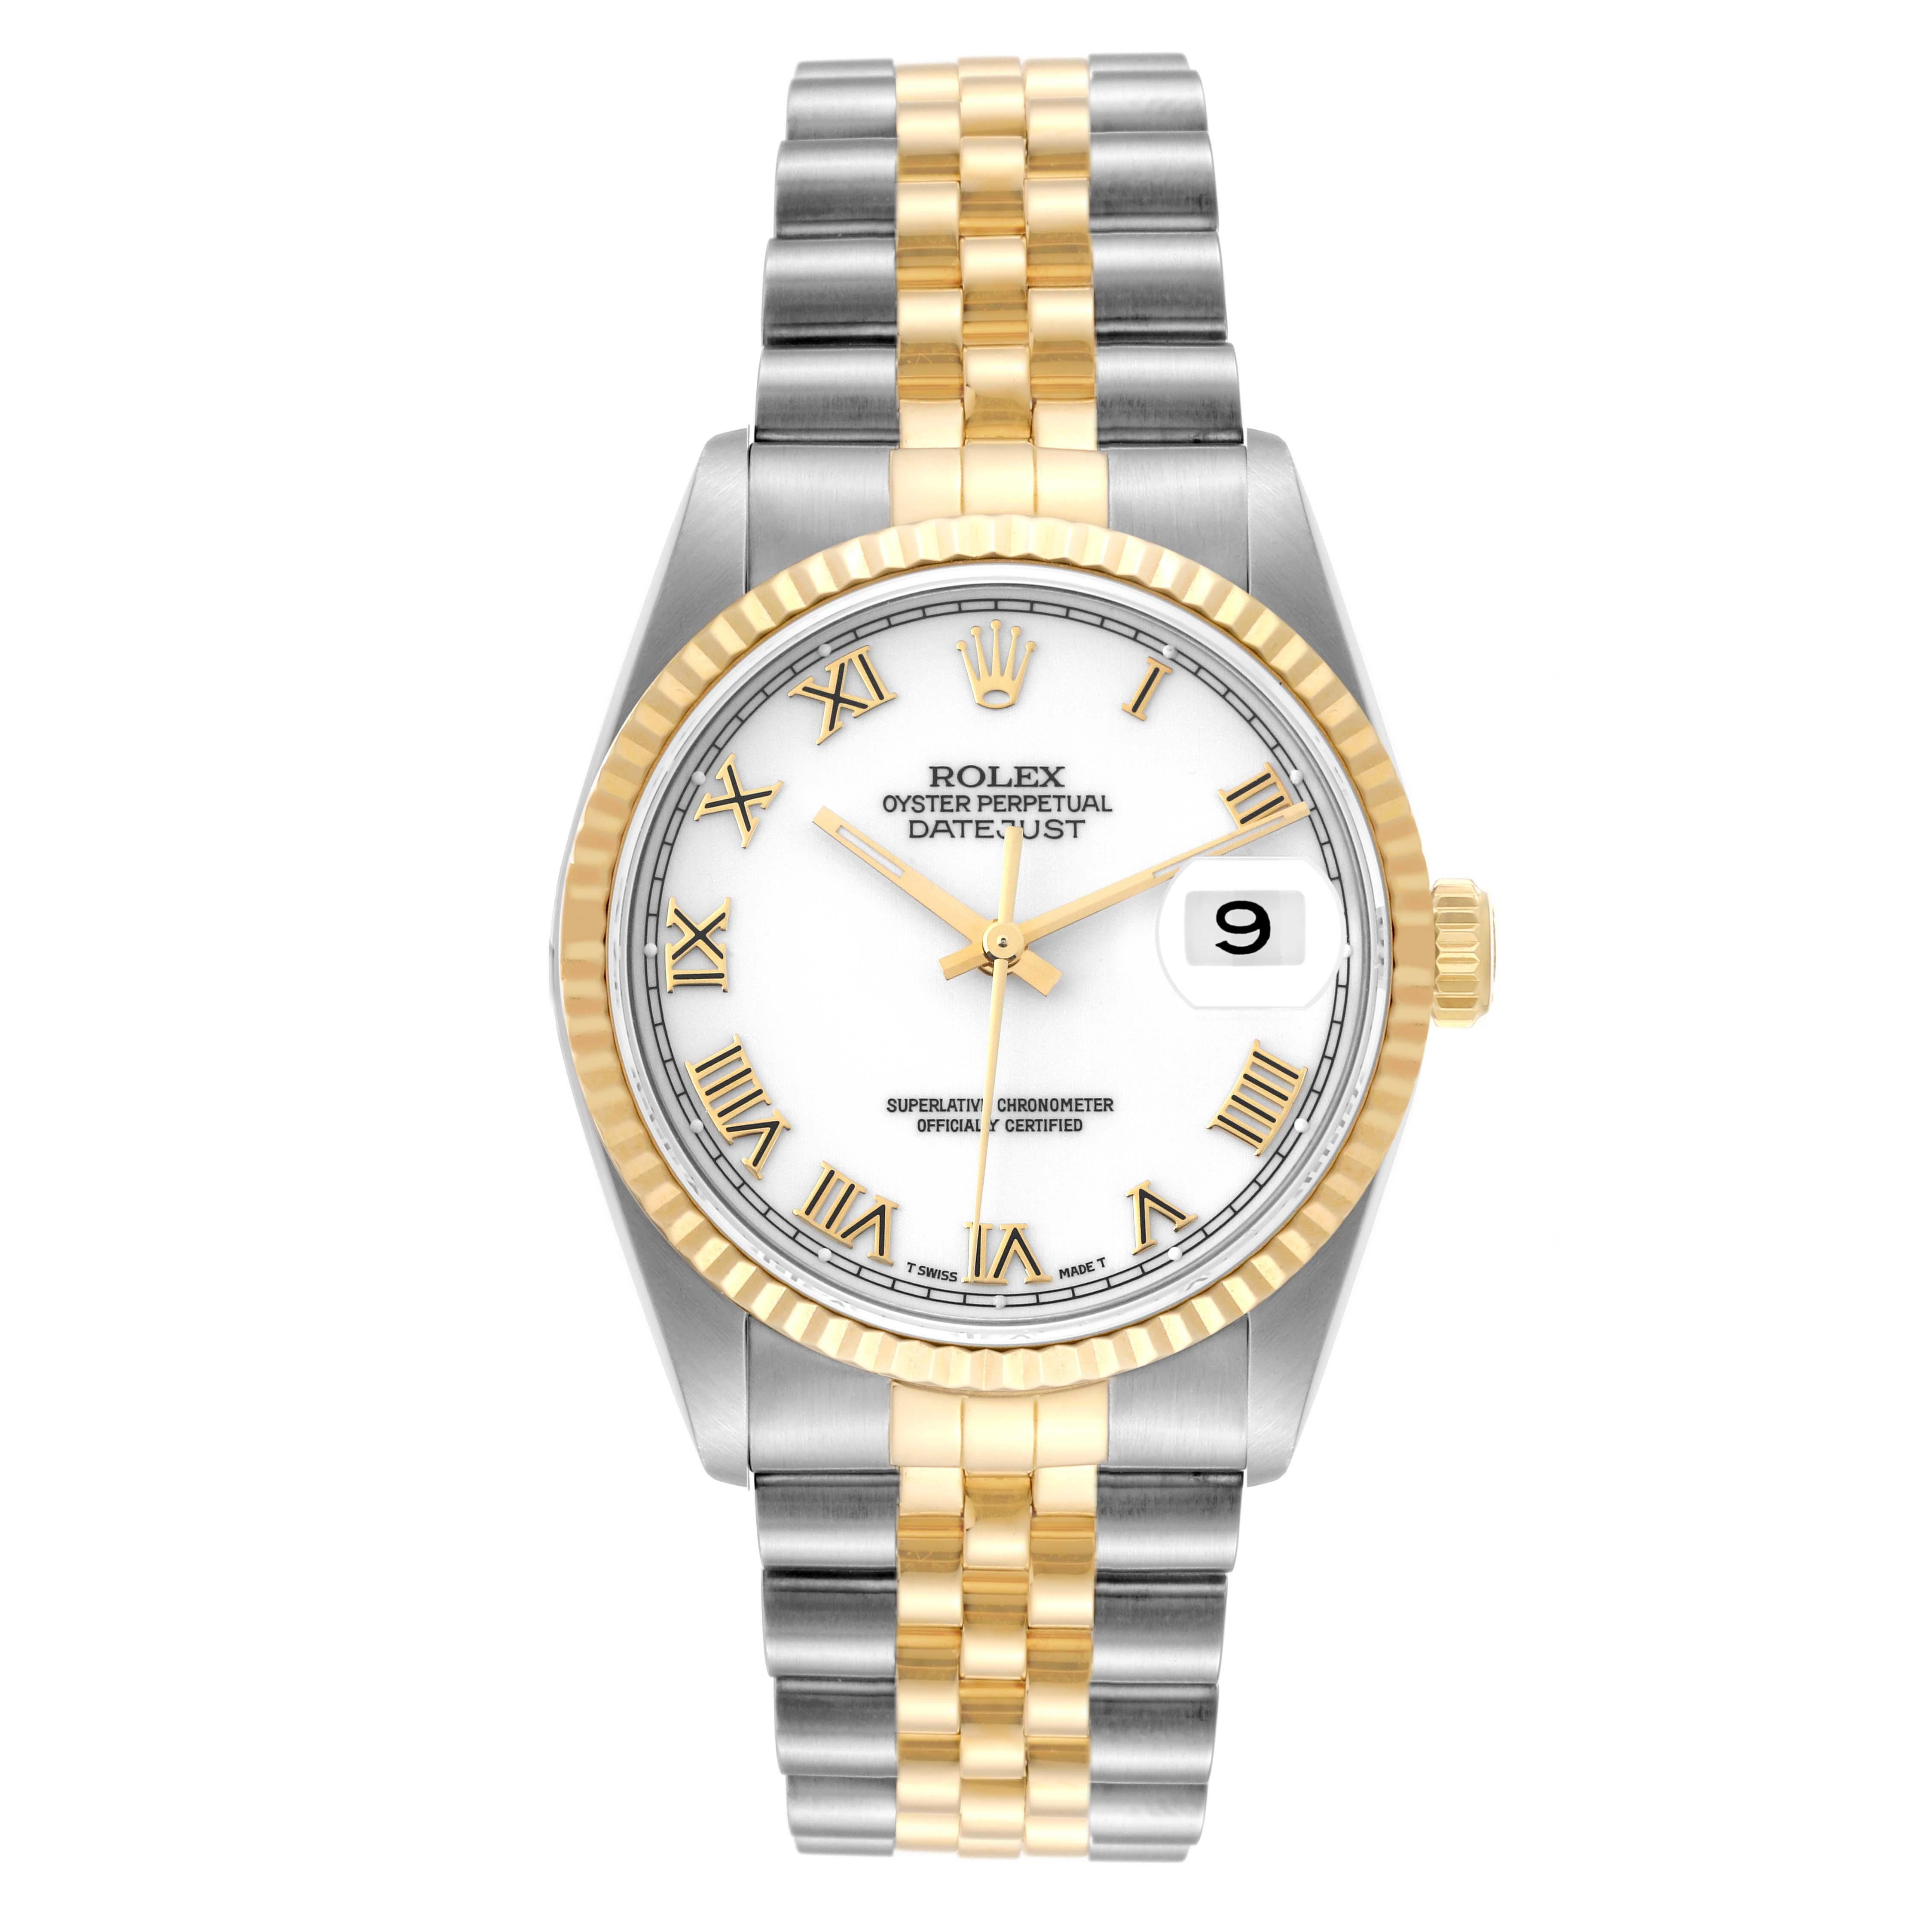 Rolex Datejust Steel Yellow Gold White Dial Mens Watch 16233 Box Papers. Officially certified chronometer automatic self-winding movement. Stainless steel case 36 mm in diameter.  Rolex logo on an 18K yellow gold crown. 18k yellow gold fluted bezel.